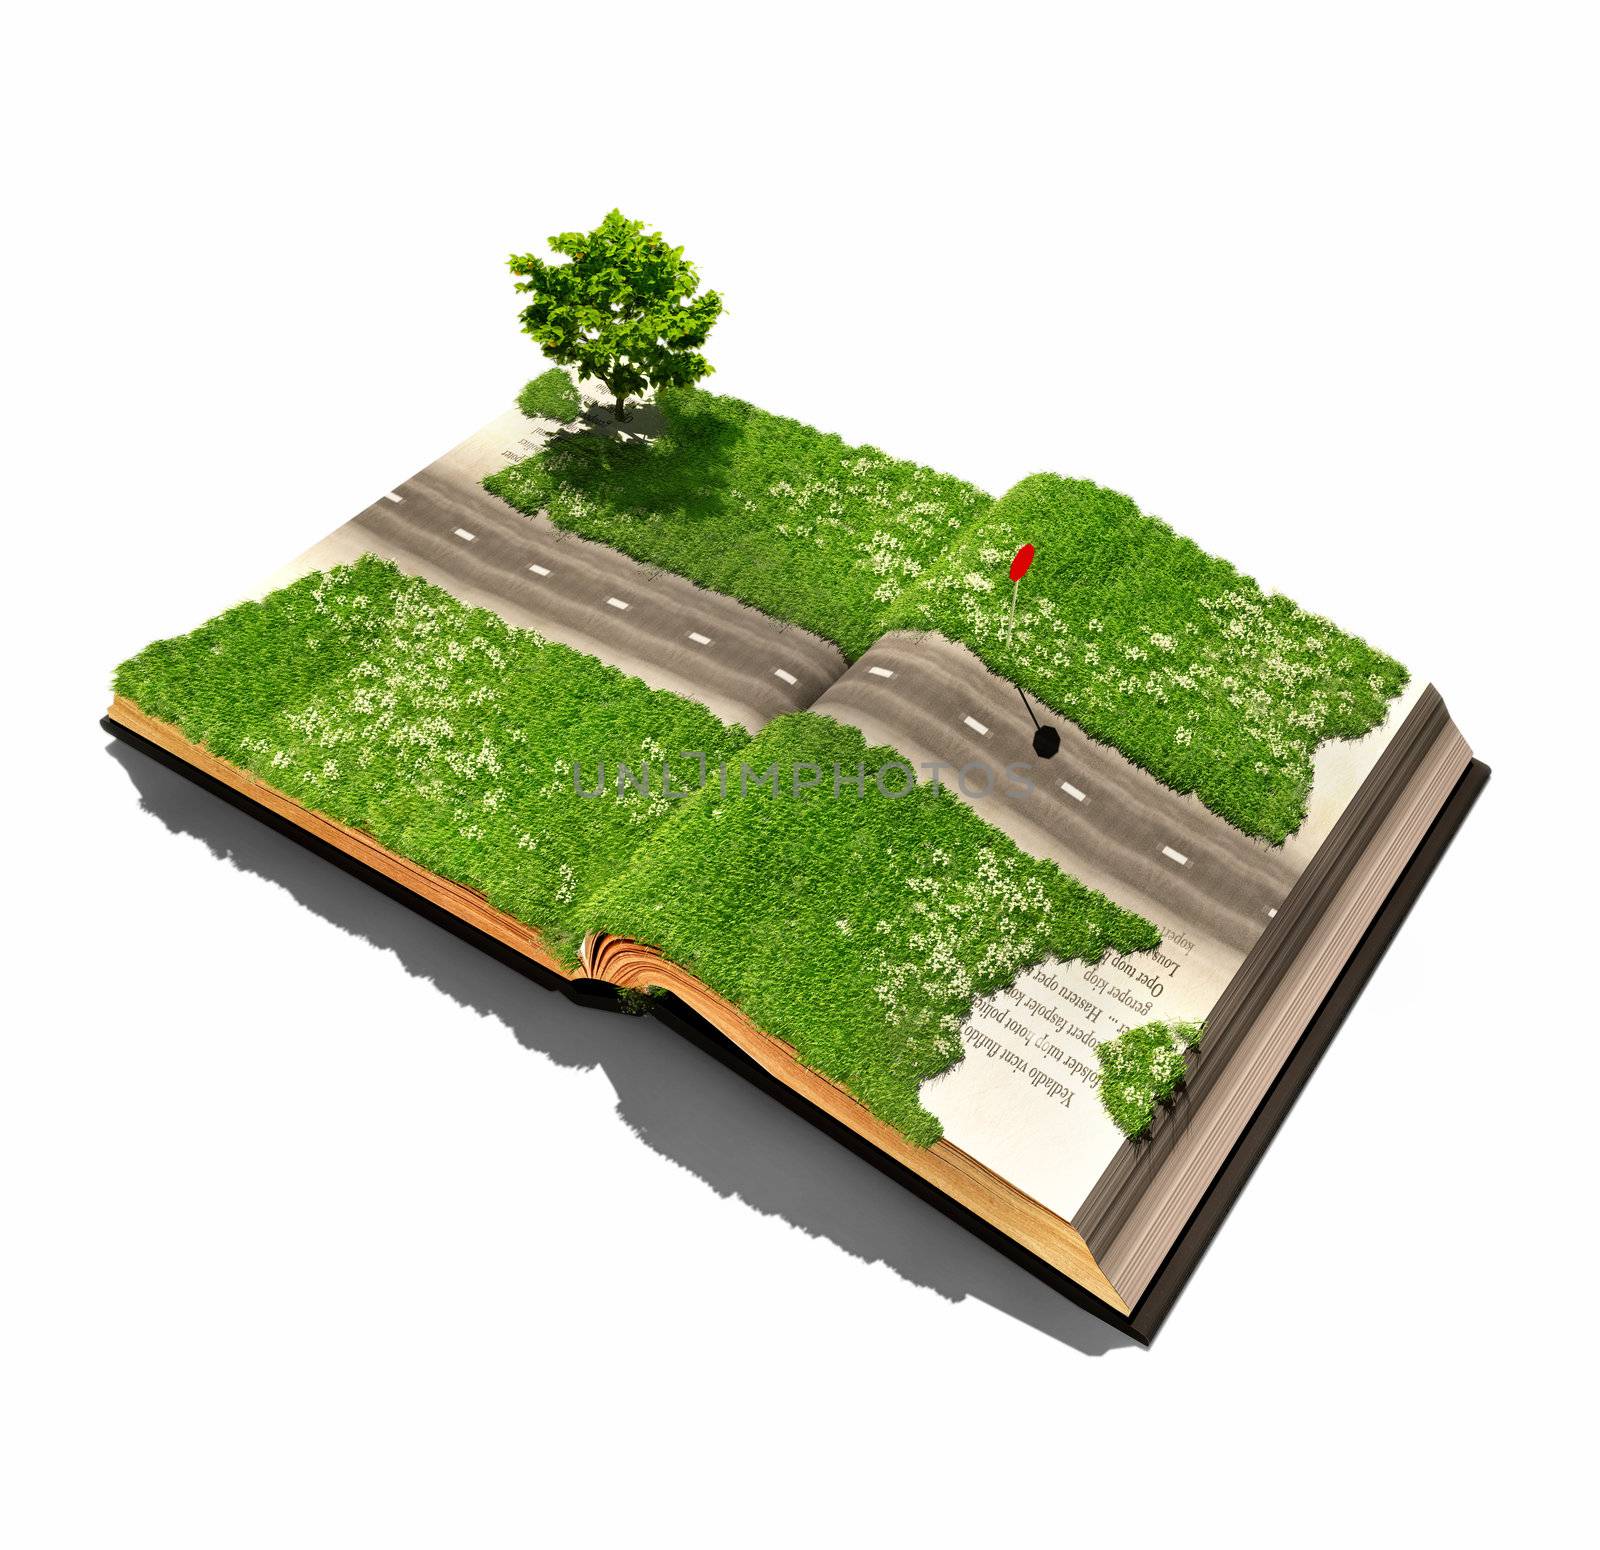 road on the book pages (illustrated concept)